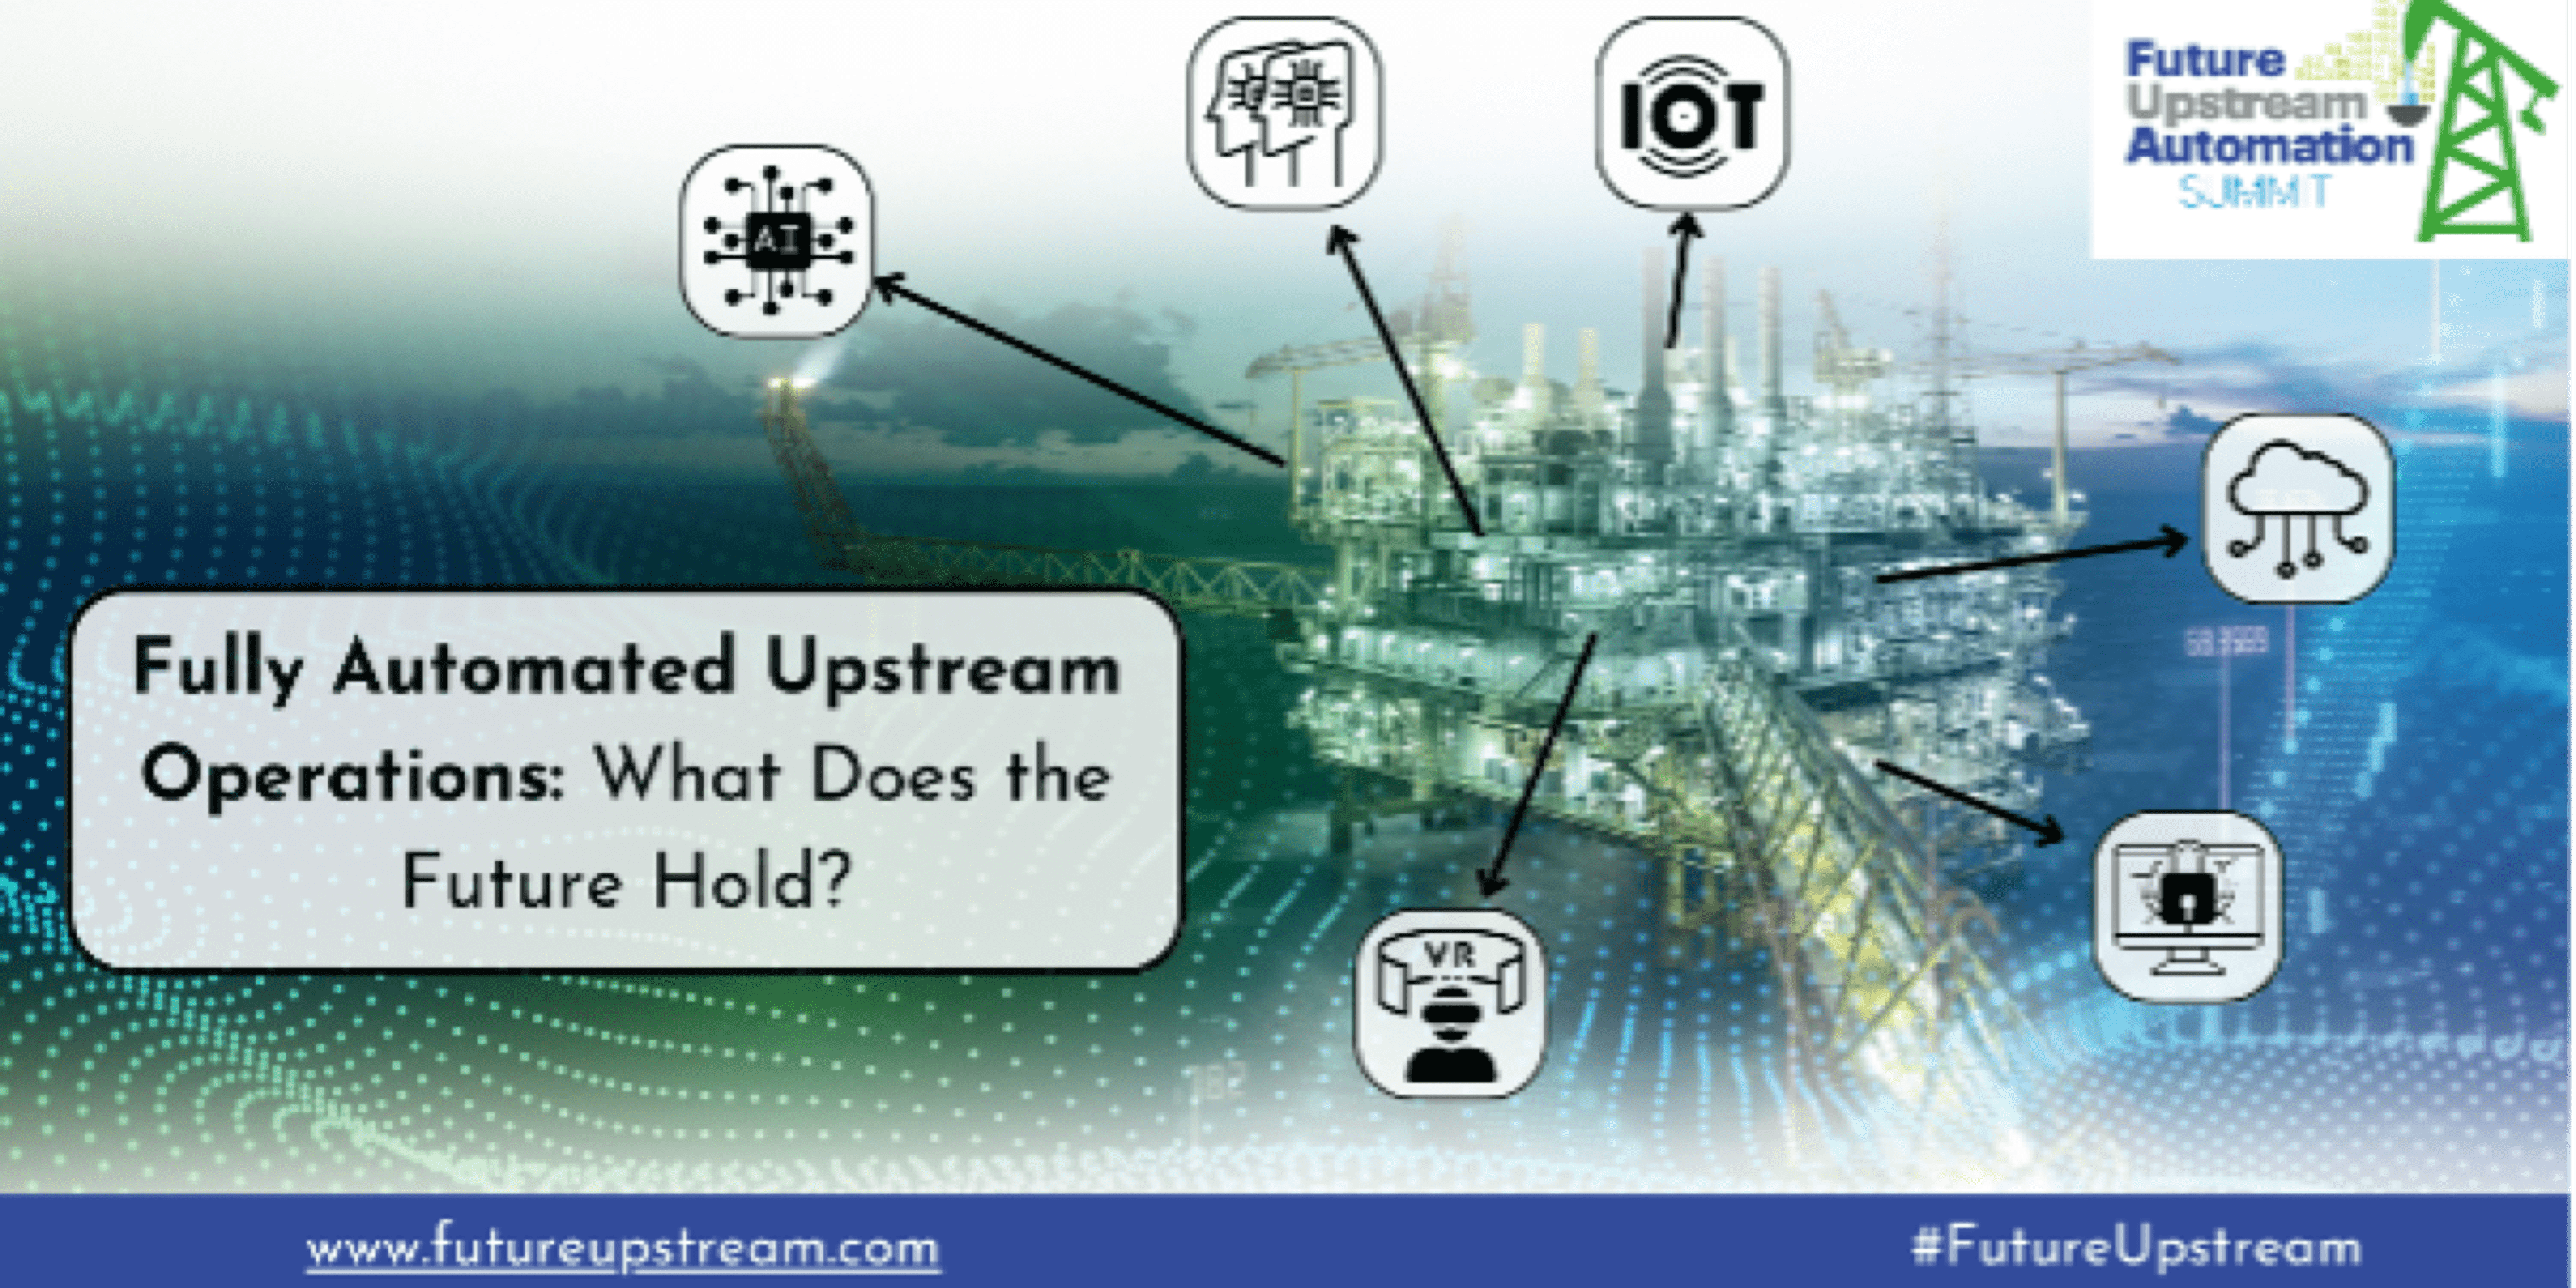 Fully automated upstream operations